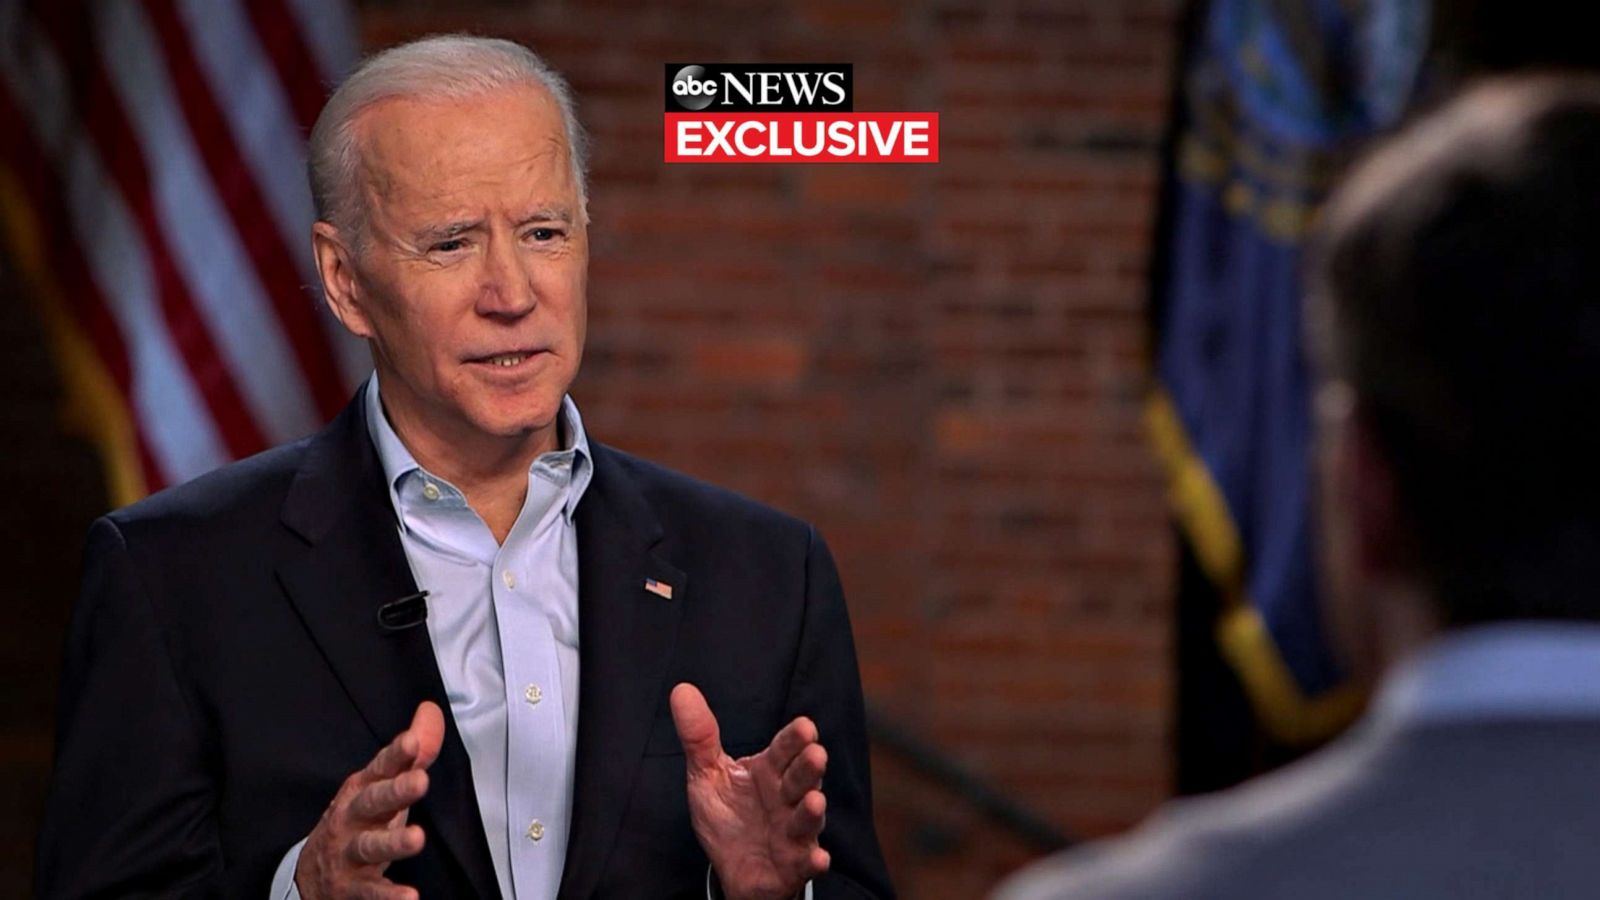 Biden escalates attacks on Buttigieg He hasnt been able to unify the black community image photo